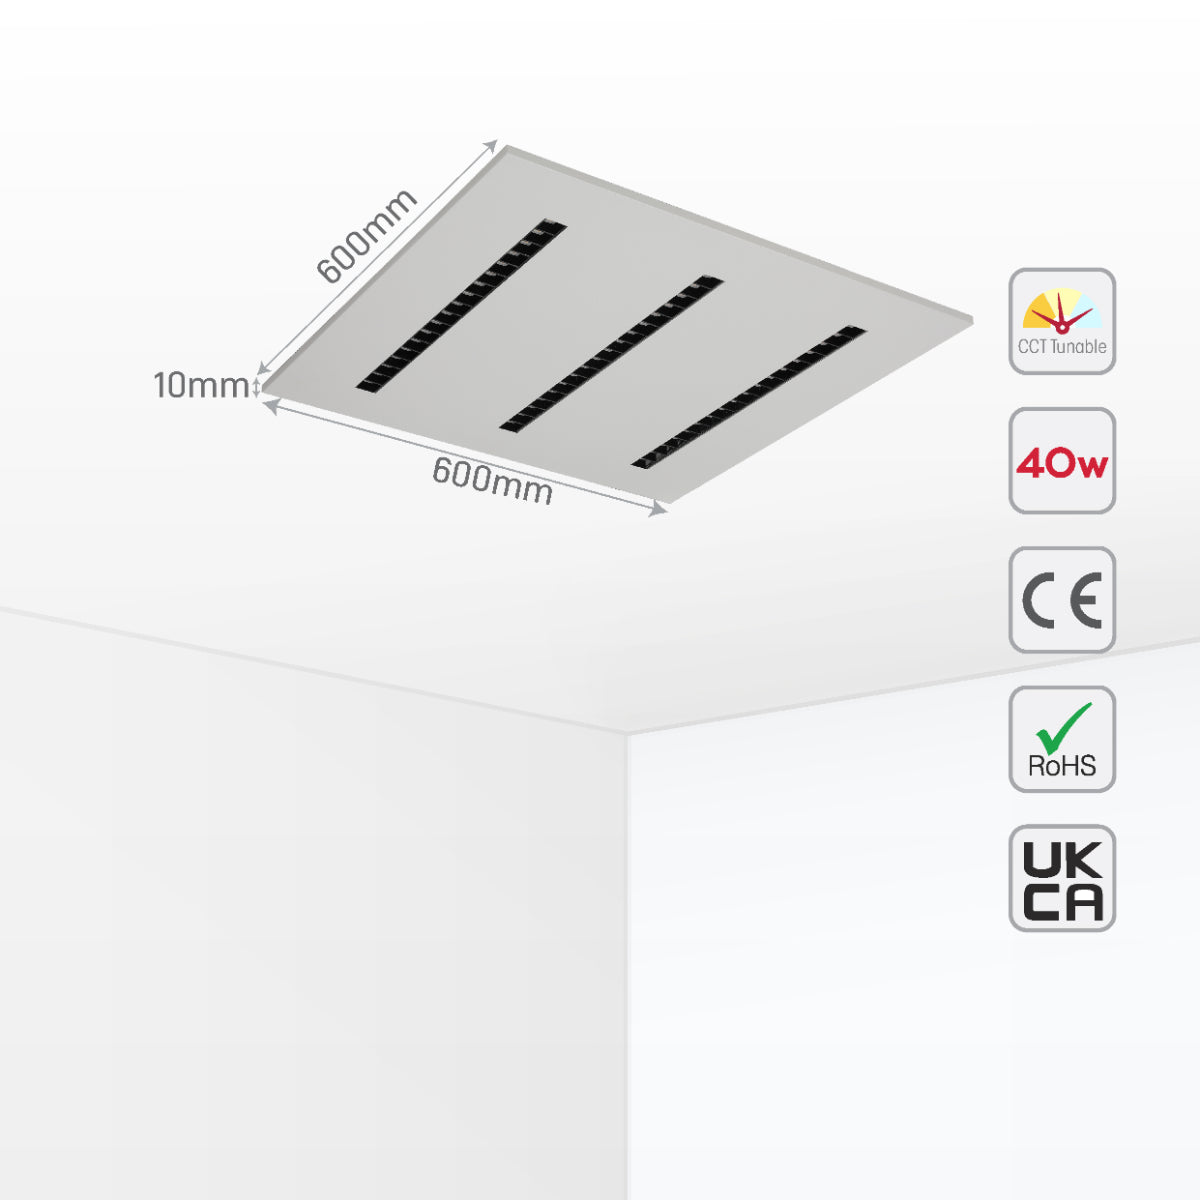 Size and certifications of LuminEssence OfficePro Anti Glare Laser LED Panel Light 40W 4000lm Low UGR 600x600 3CCT 165-015059